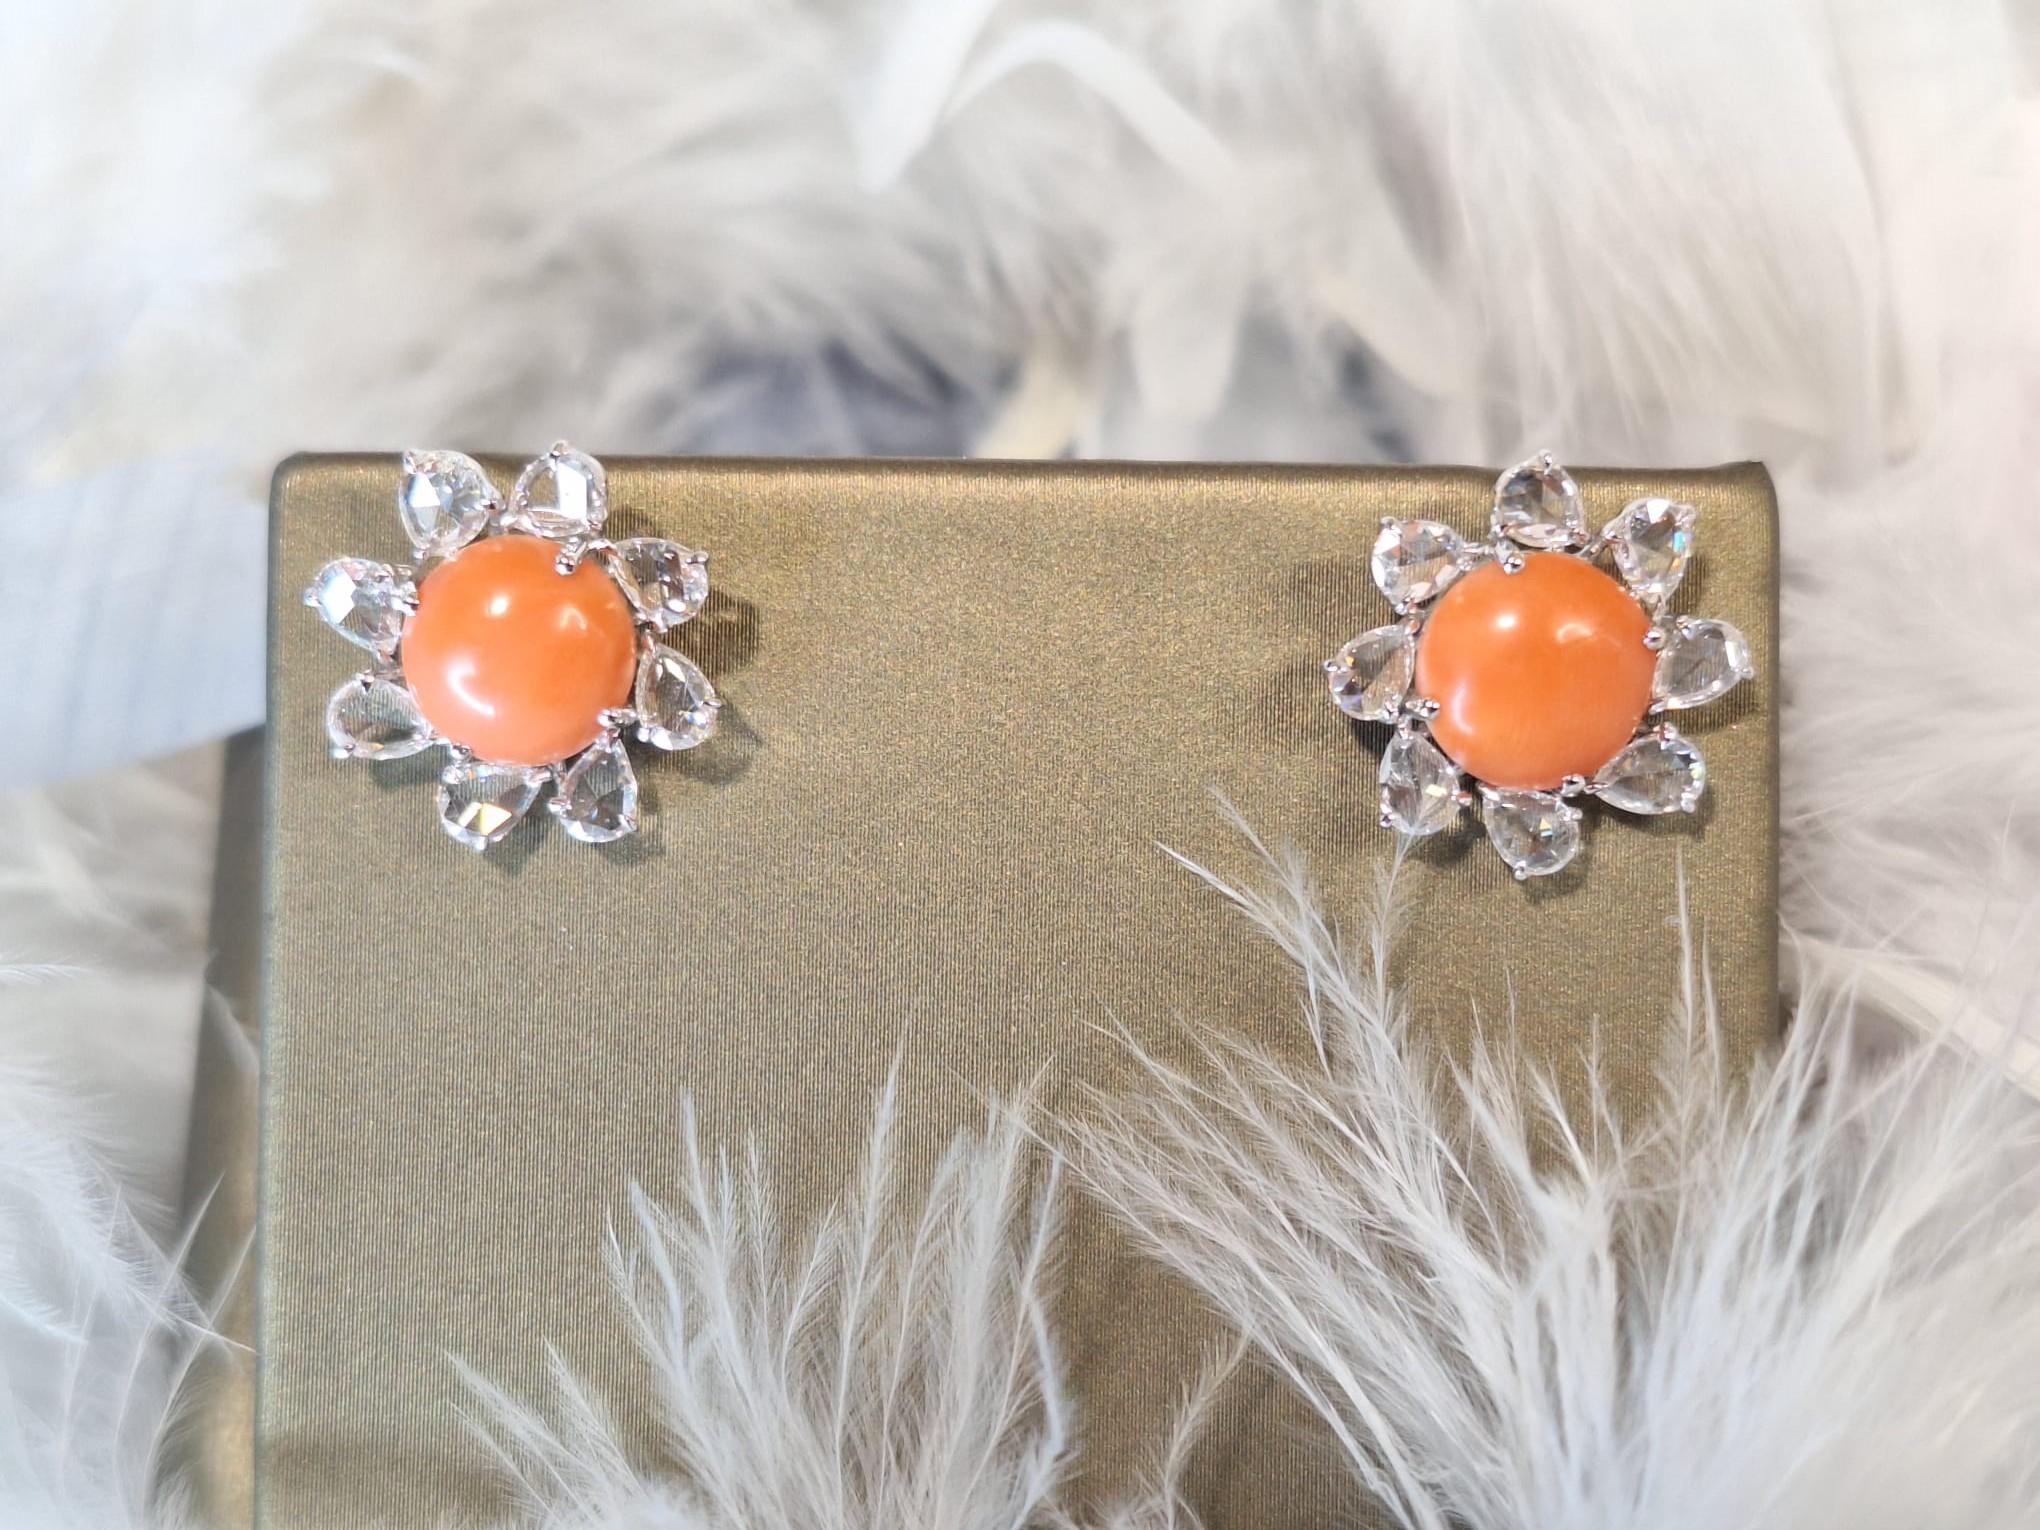 18K White Gold Diamond Earring with Coral

Coral is said to be beneficial for the body, mind, and spirit, and can be used to treat a variety of ailments, also said to promote positive energy and calmness.

Diamonds symbolise clarity and purity, also